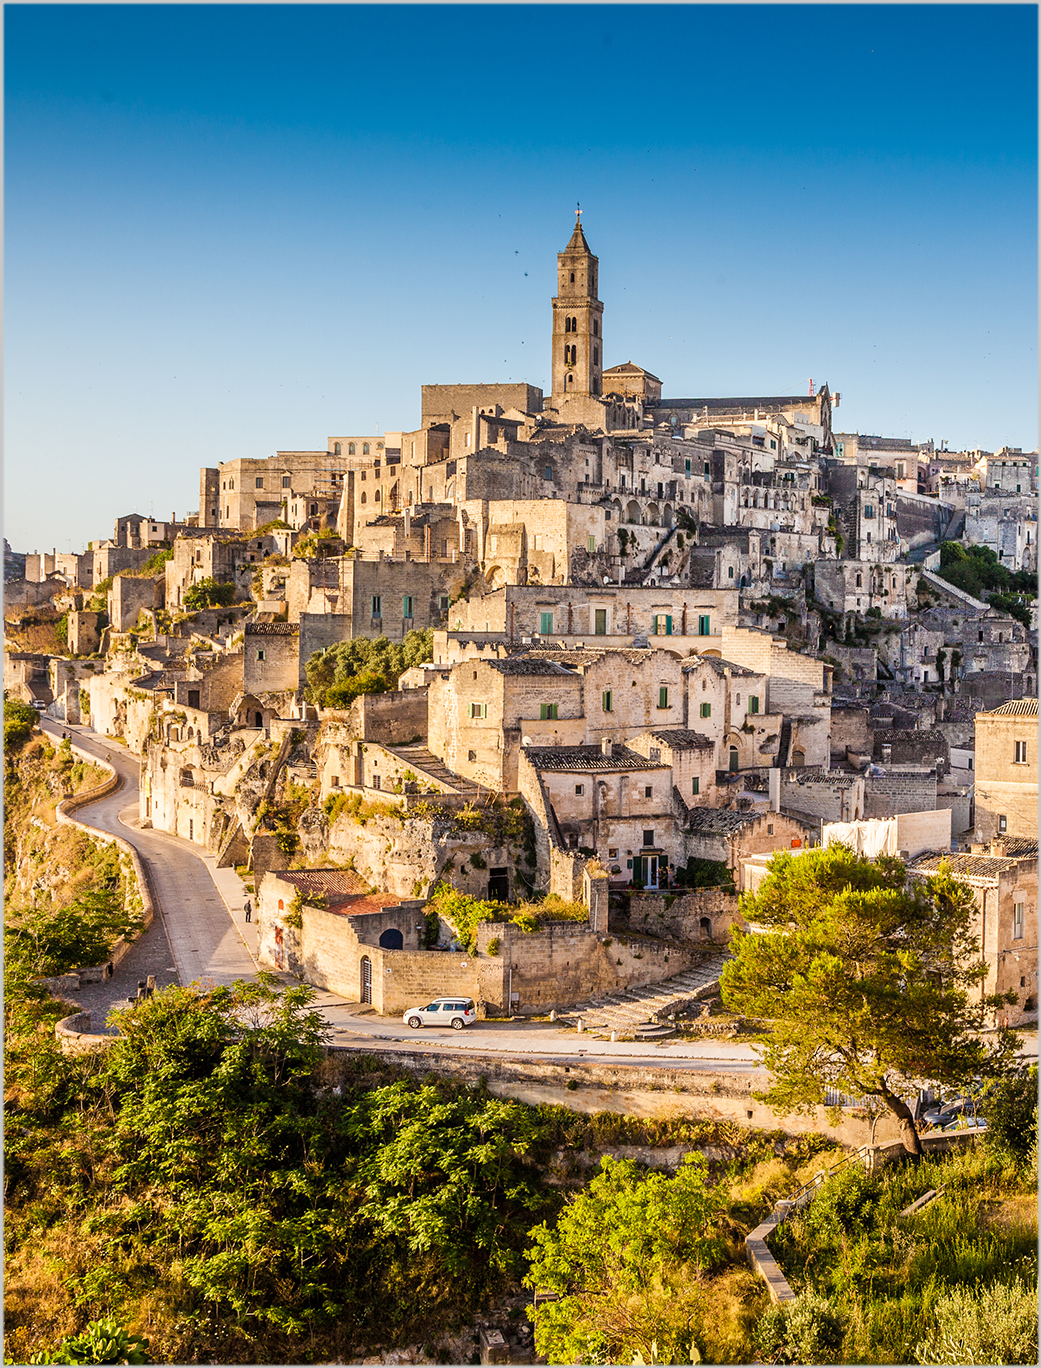 MATERA. CULTURE AND BEAUTY IN A PLACE WHERE TIME HAS STOOD STILL.